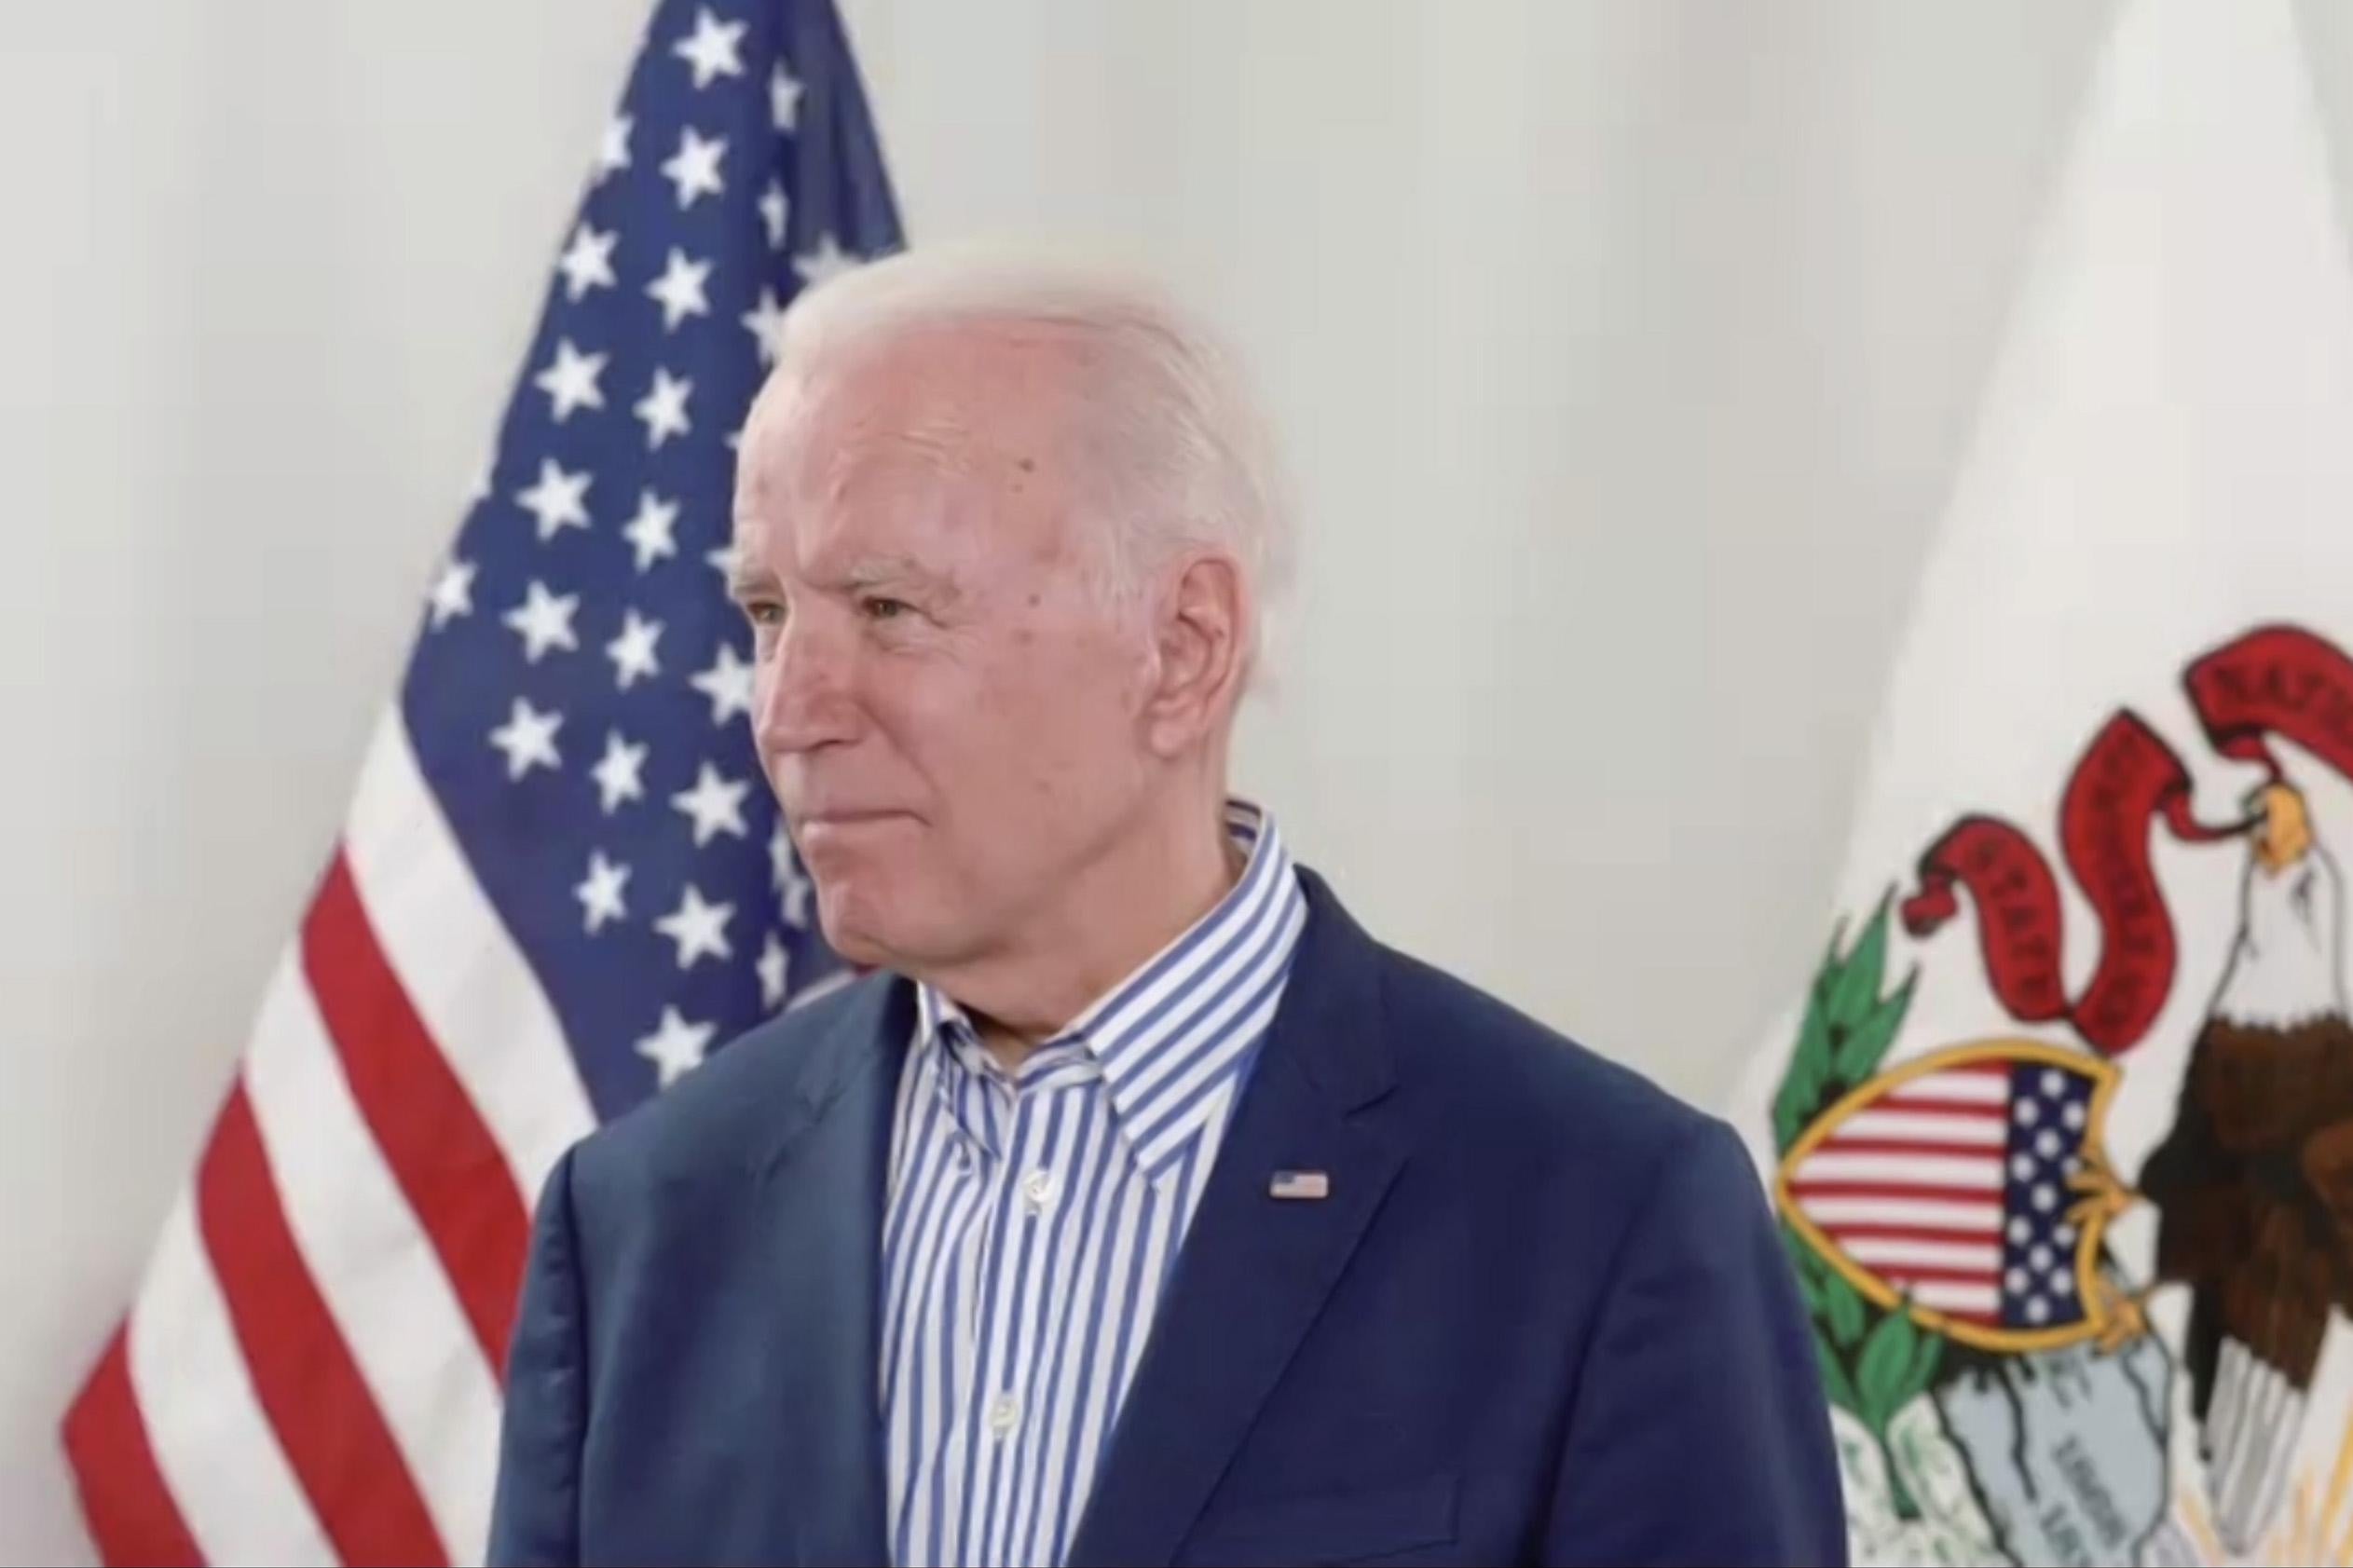 Biden stands with the American flag and Illinois flag behind him